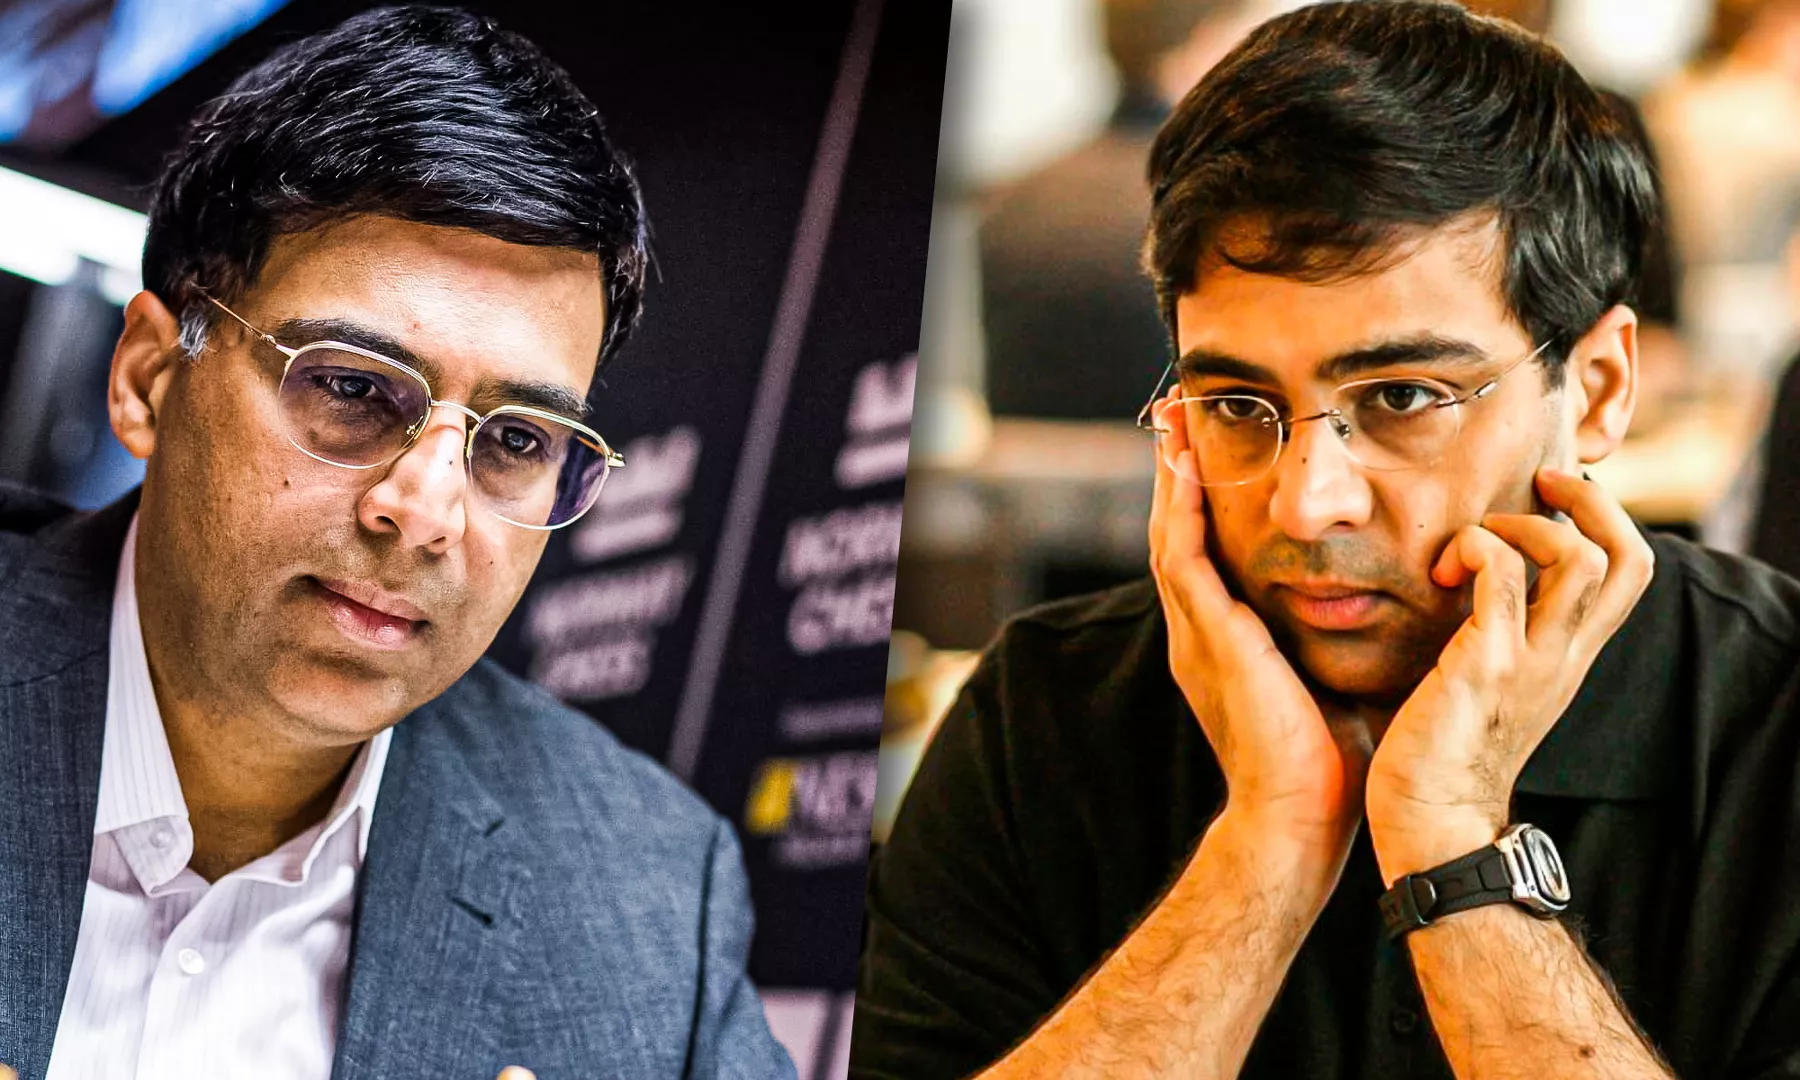 Vishwanathan Anand going wild on twitter today 💀